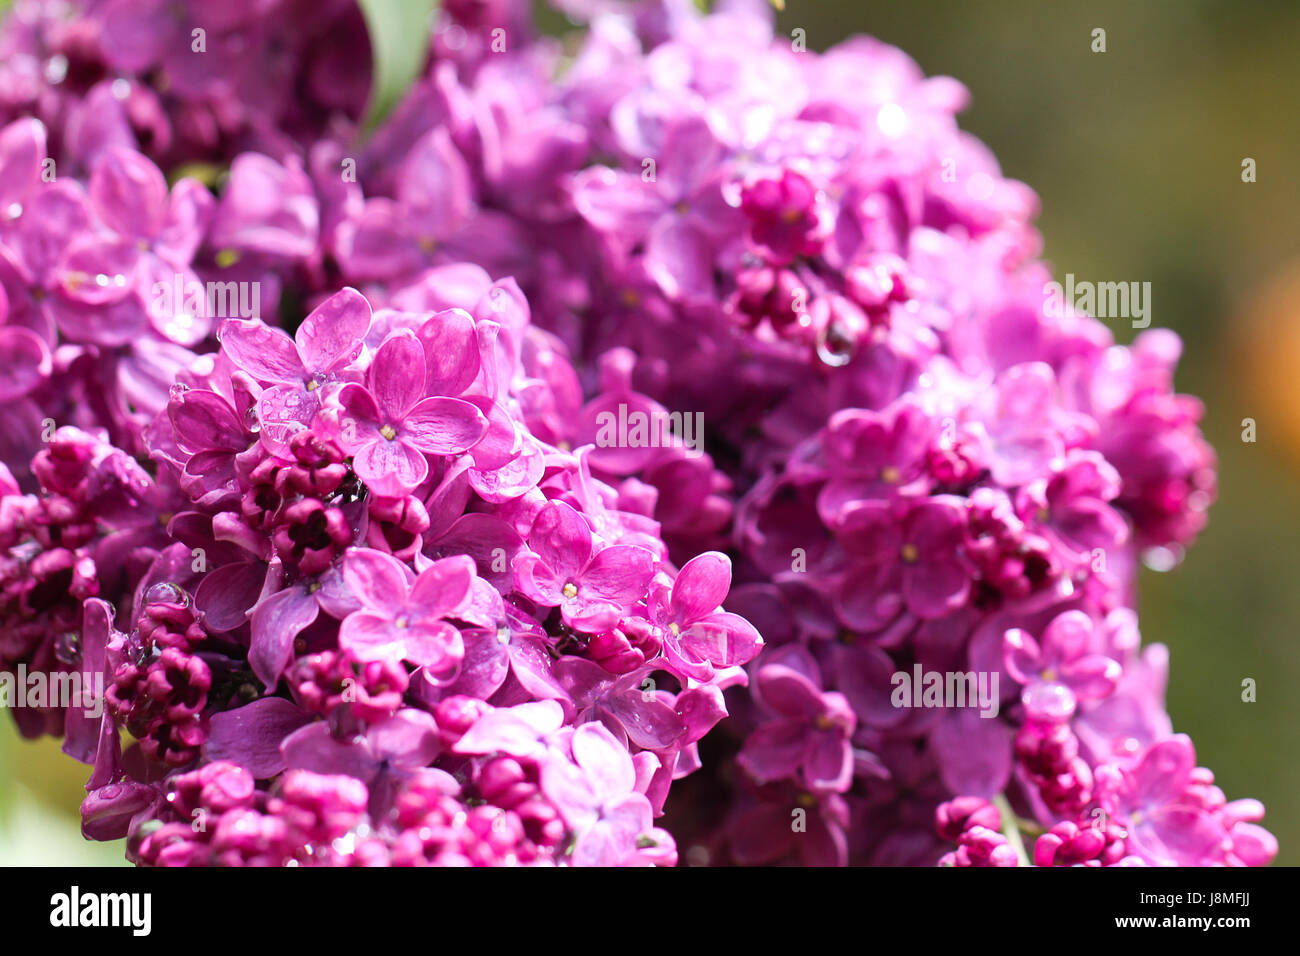 Syringa vulgaris, varietal. Two branches are overflowing with vivid pink/purple lilac blooms and buds at the Warkworth Lilac Festival. Stock Photo